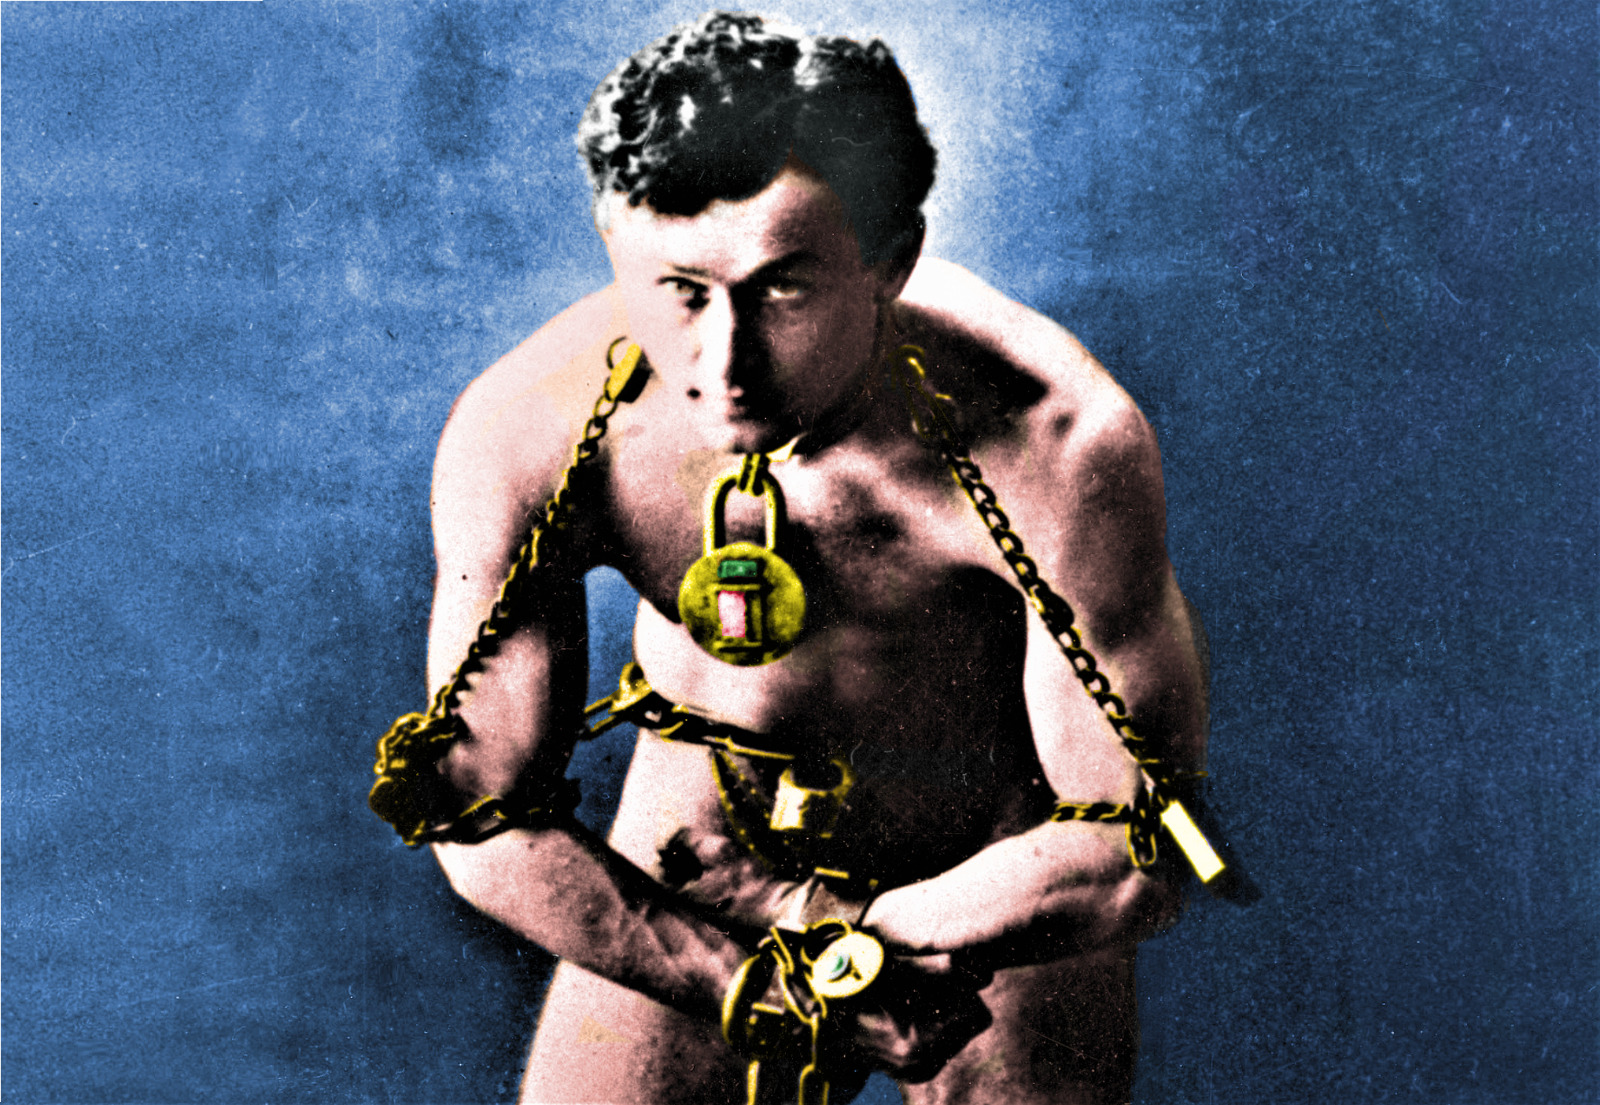 HOUDINI IN CHAINS - REFRIGERATOR PHOTO MAGNET